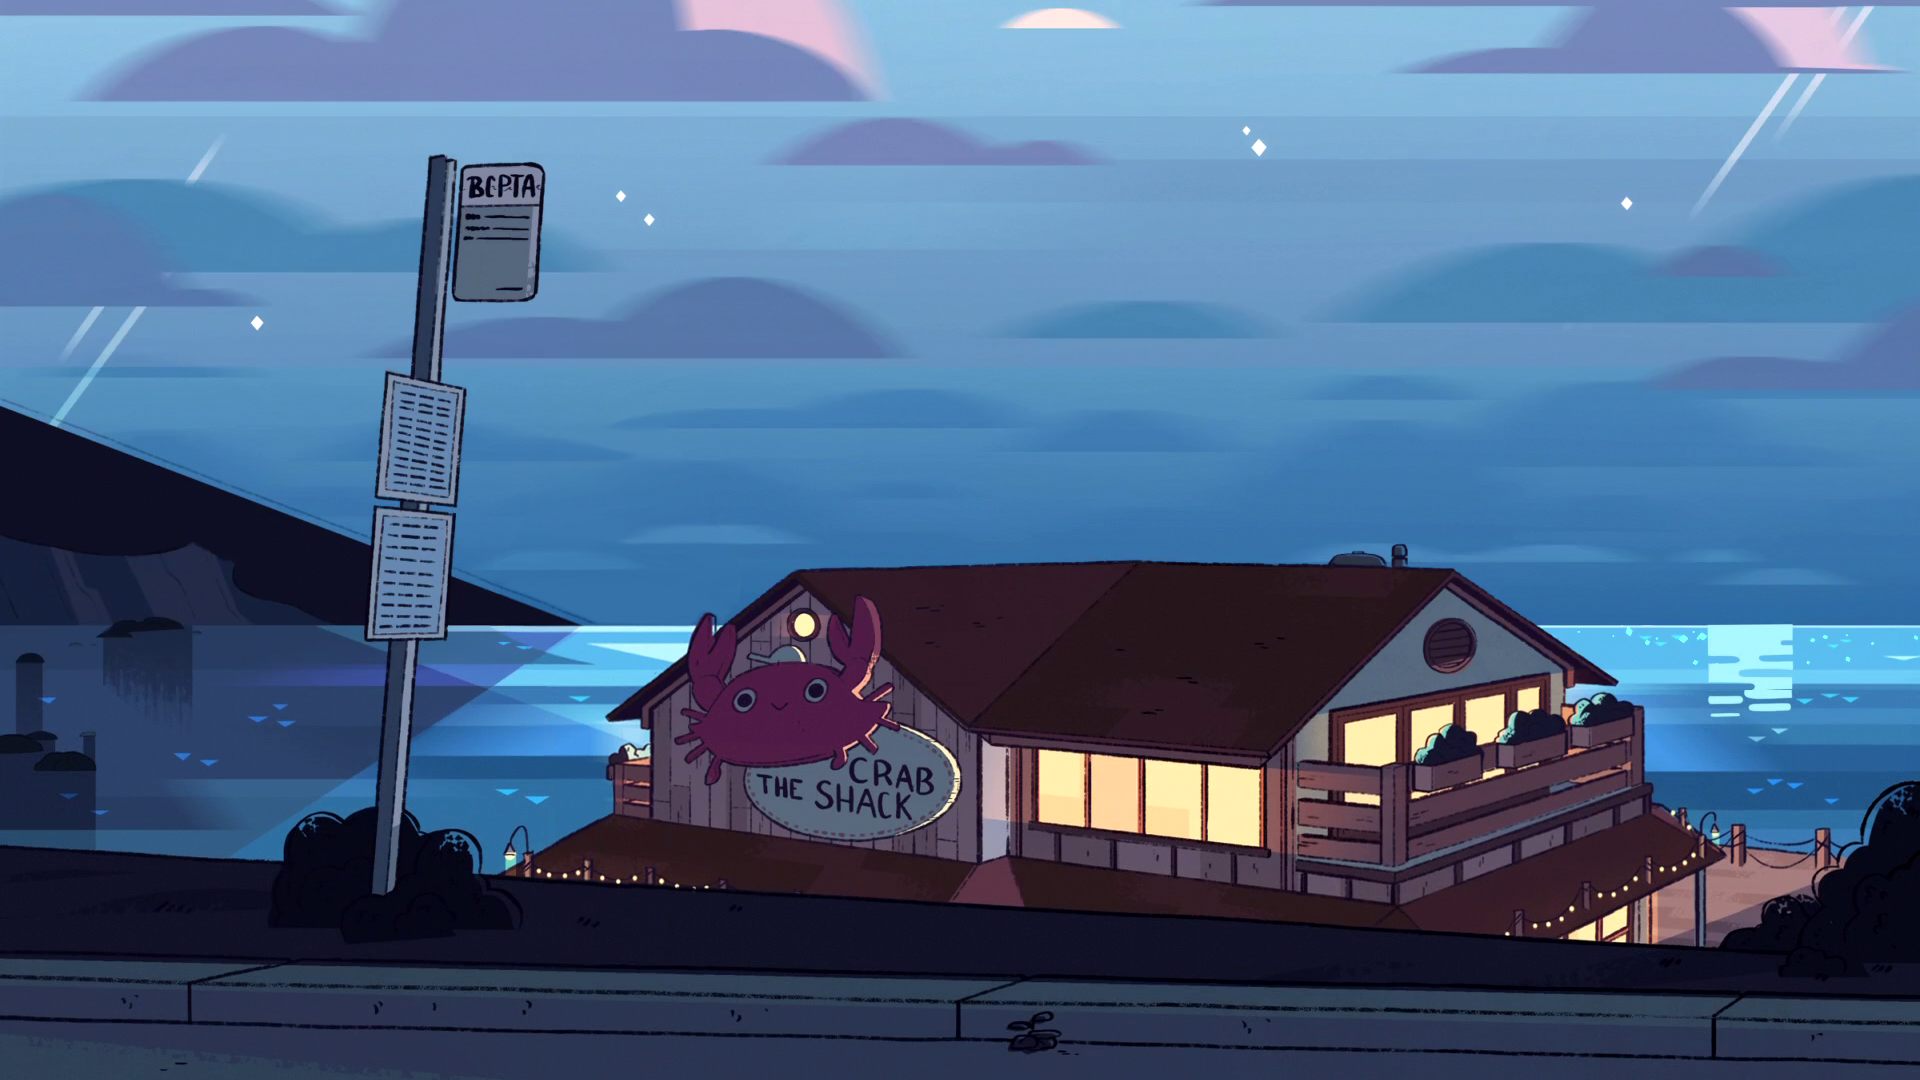 Steven Universe A Restaurant Naming Crab The Shack With Wallpaper Of Water and Blue Sky With Clouds 2K Movies